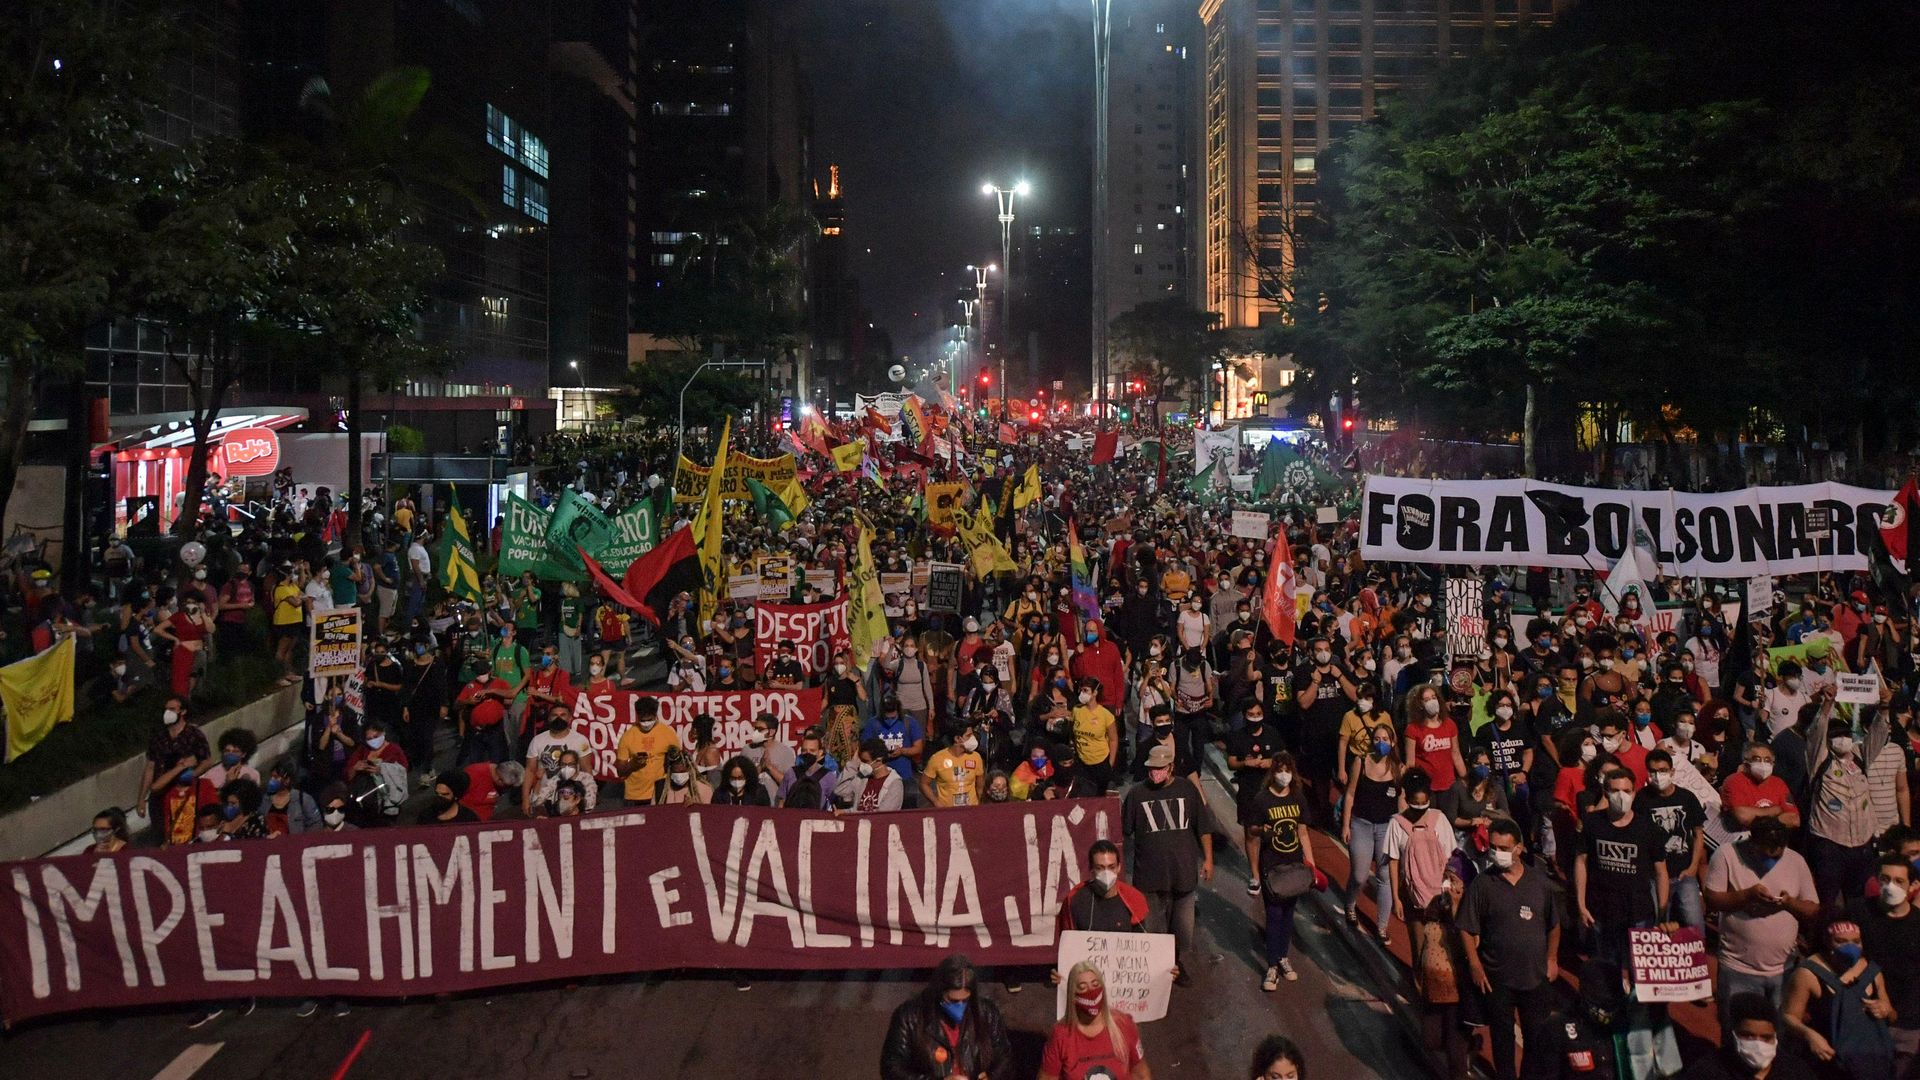  Demonstrators take part in a protest against Brazilian President Jair Bolsonaro's handling of the COVID-19 pandemic in Sao Paulo, Brazil on May 29